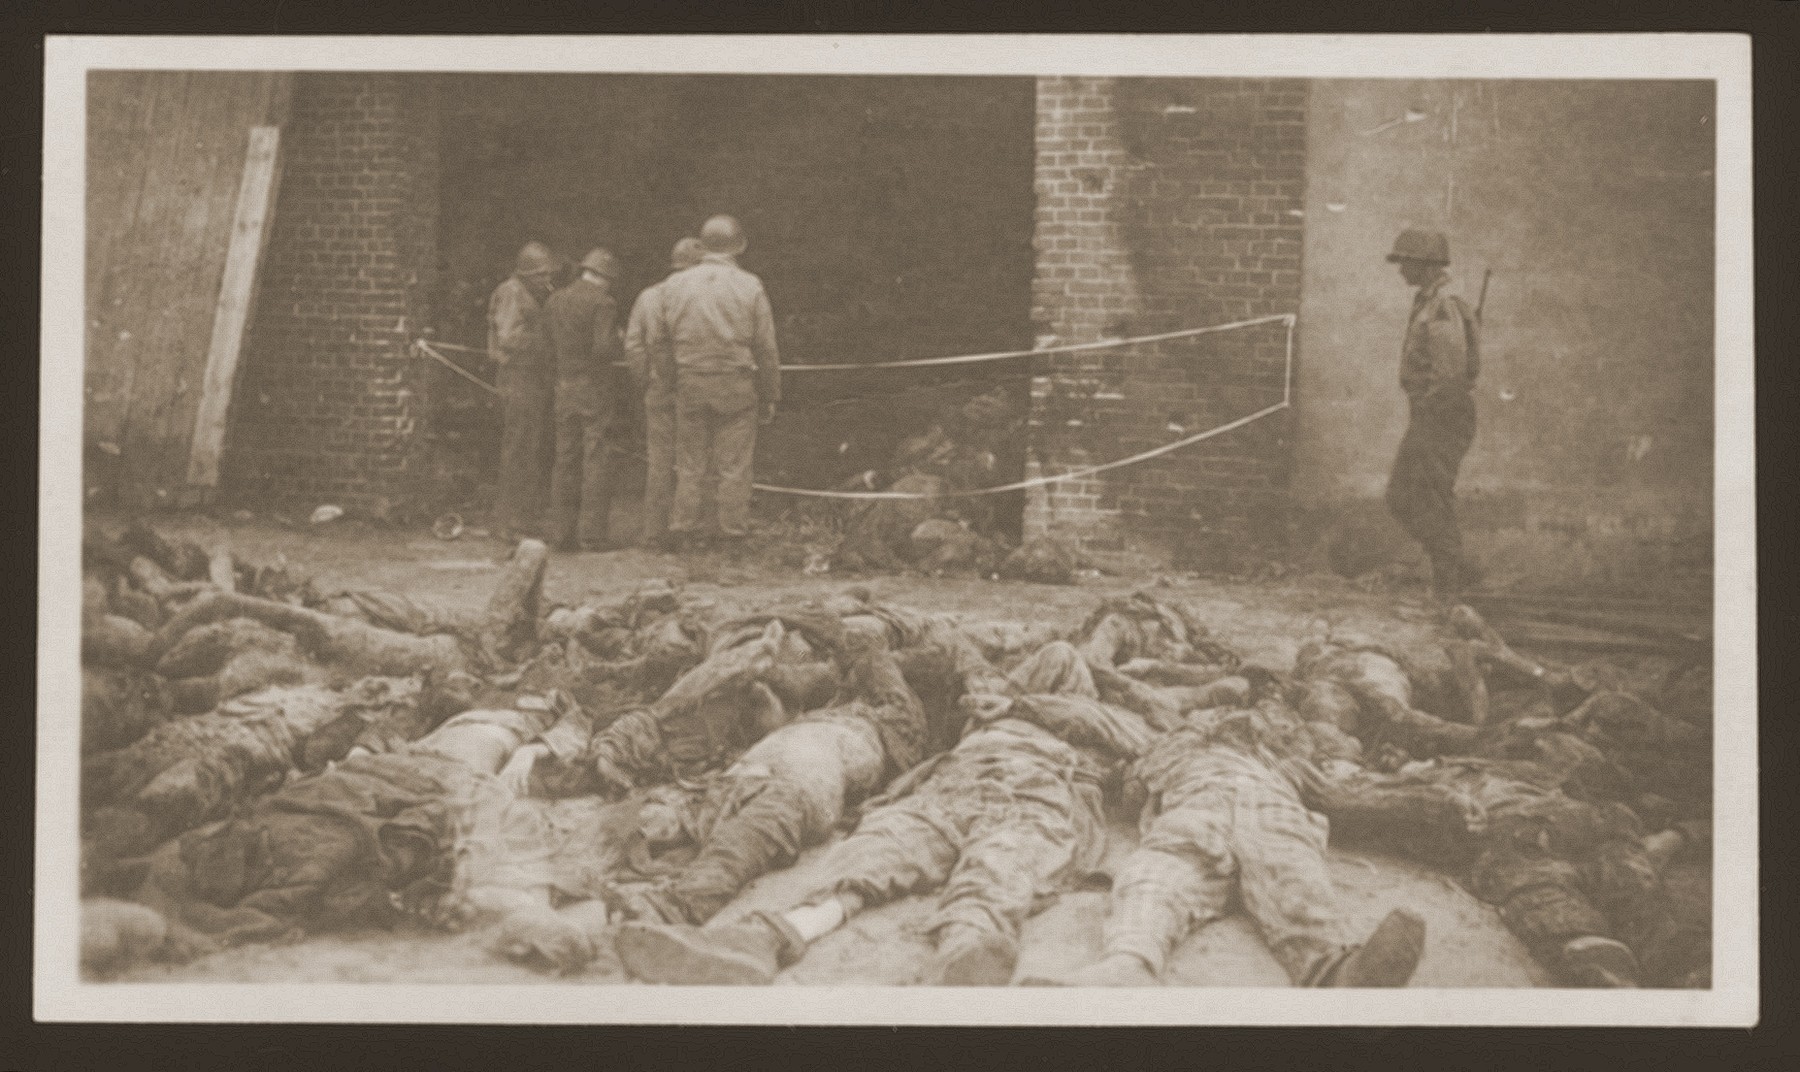 American soldiers look at the charred bodies of prisoners burned alive by the SS in a barn outside of Gardelegen.  In the foreground lie bodies already removed from the barn.